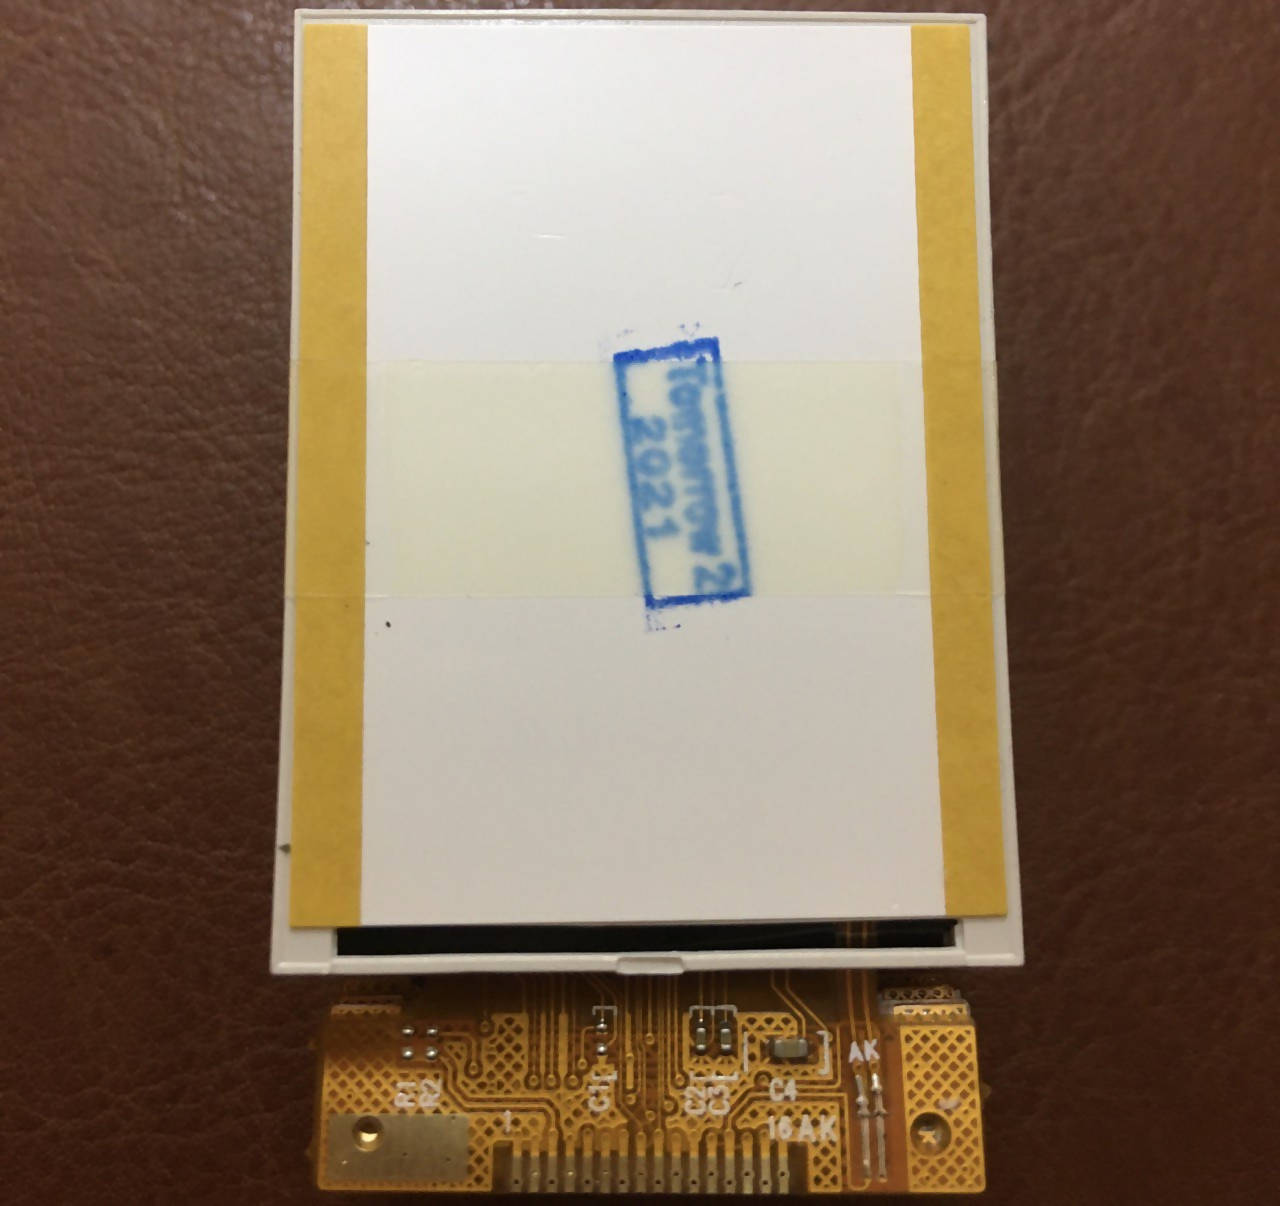 Feature Phone LCD 16 PINS SMALL